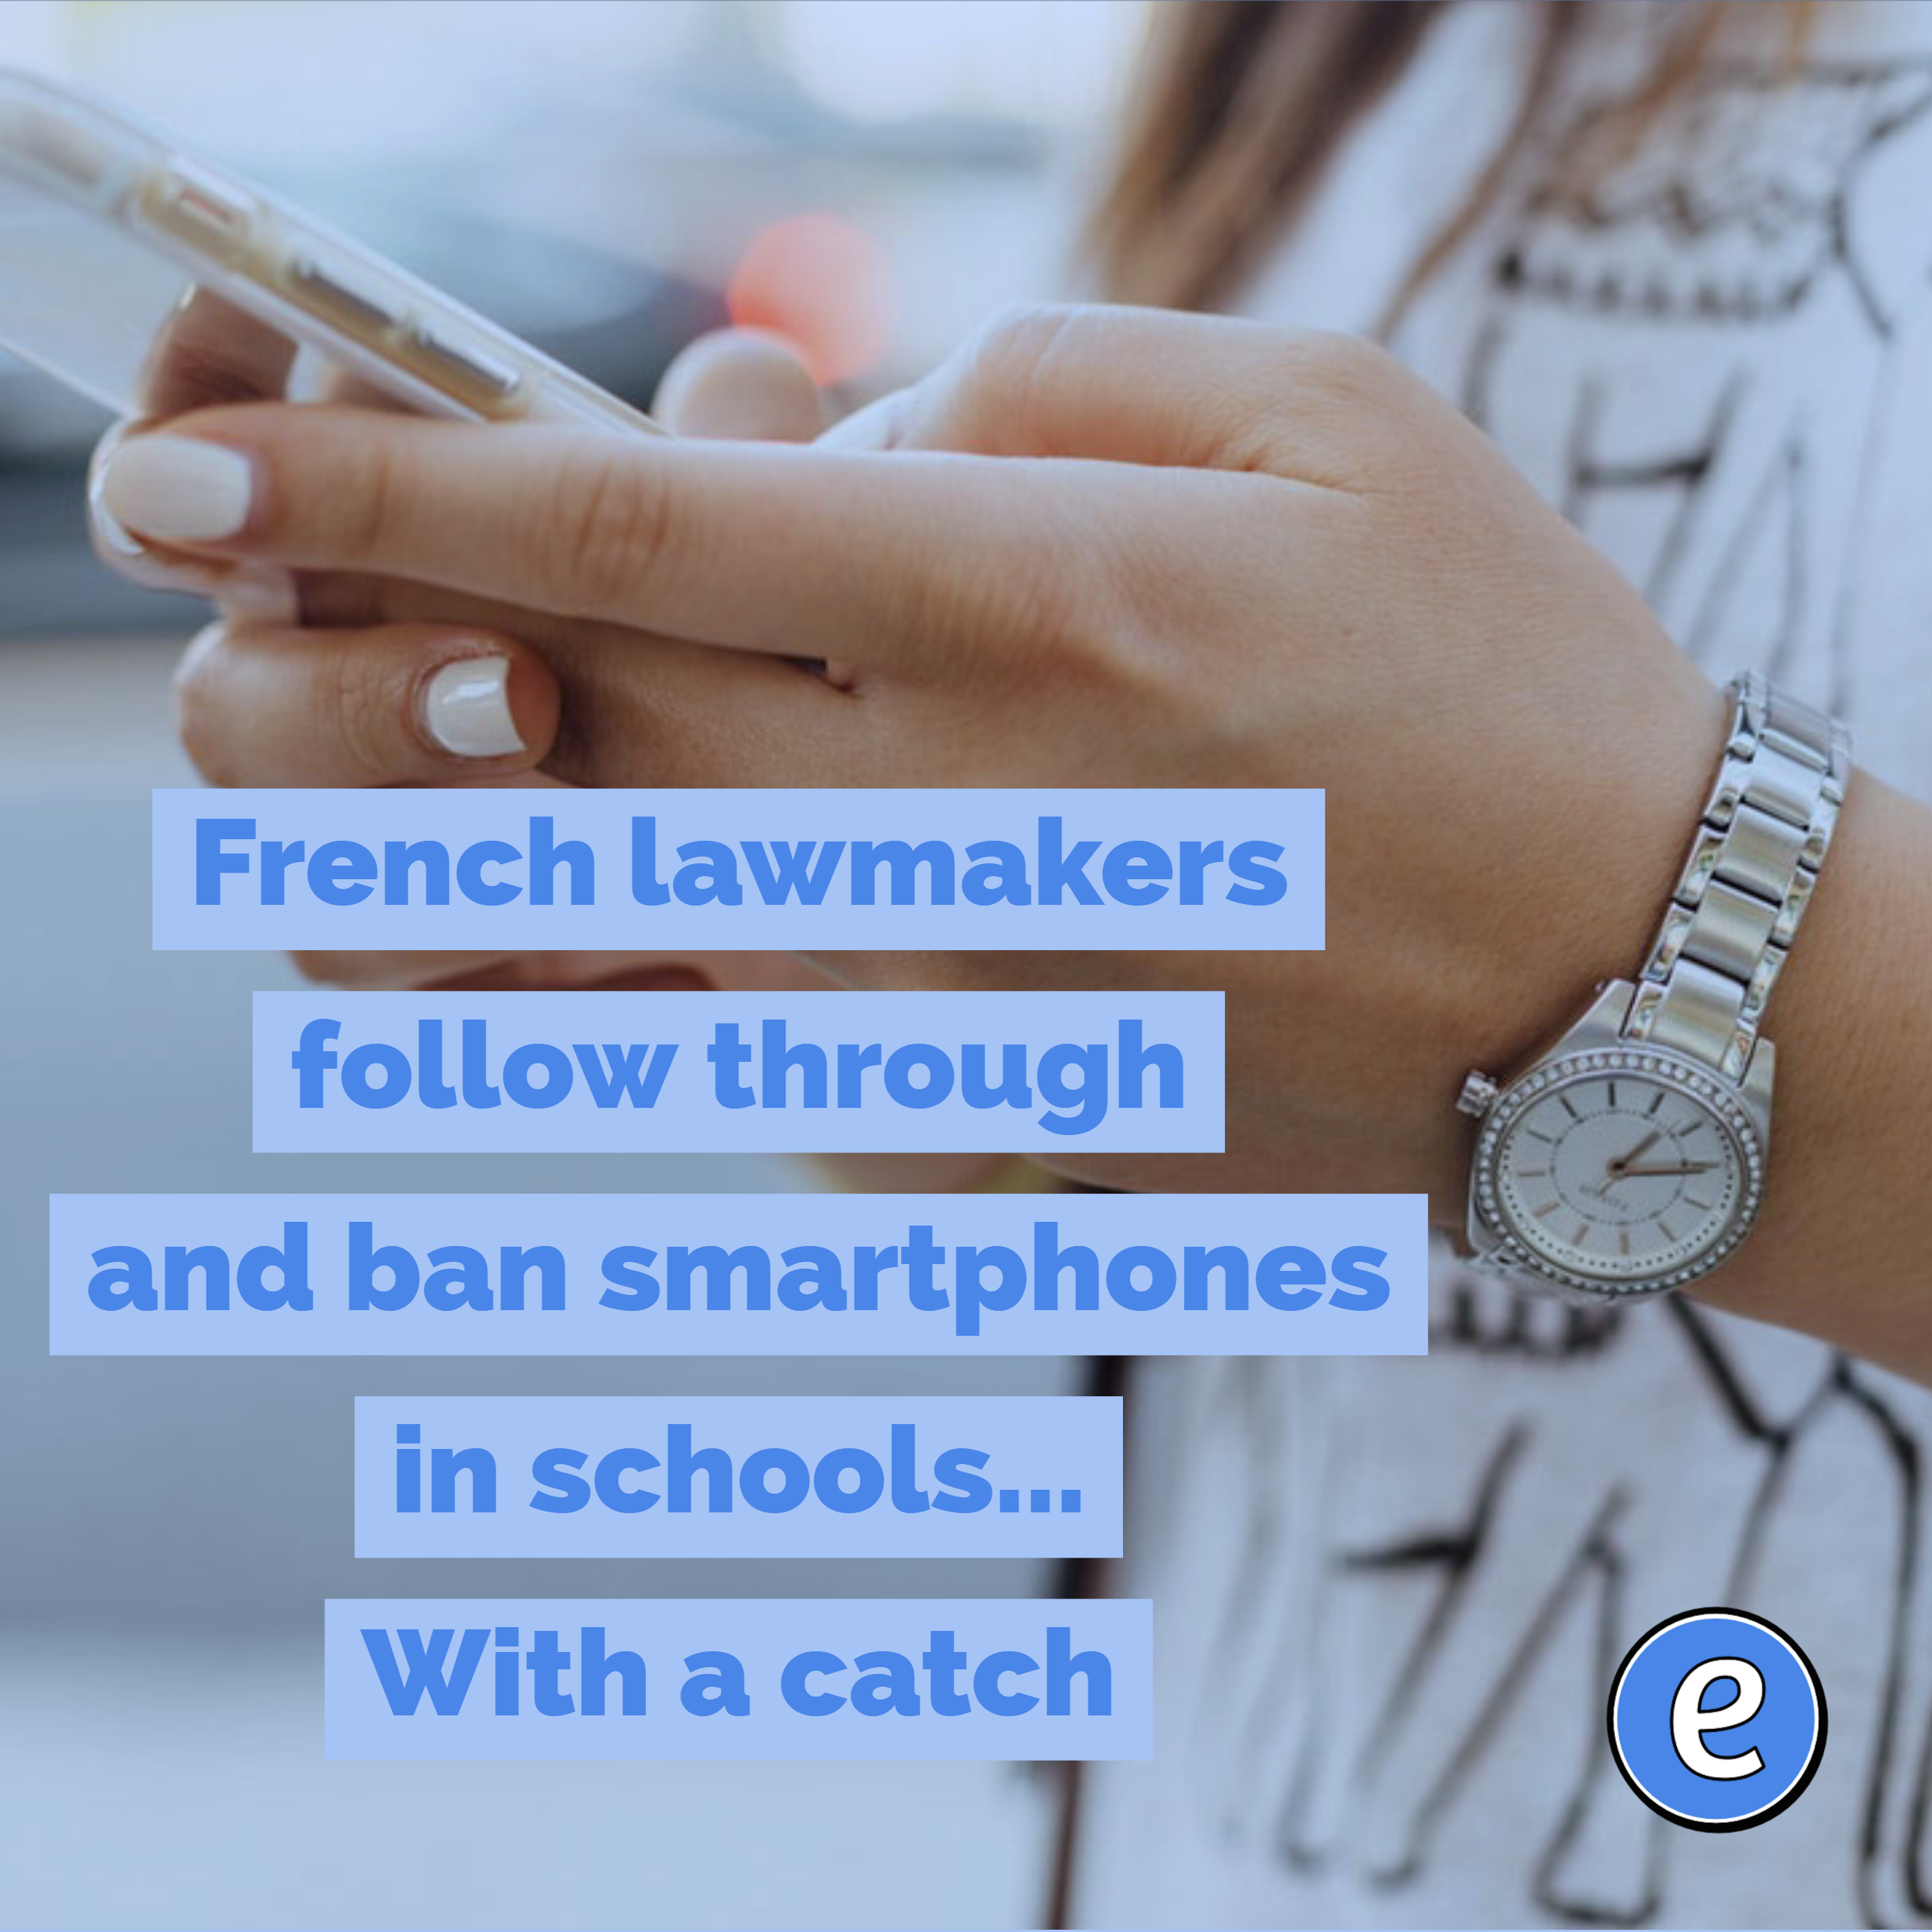 French lawmakers follow through and ban smartphones in schools… With a catch